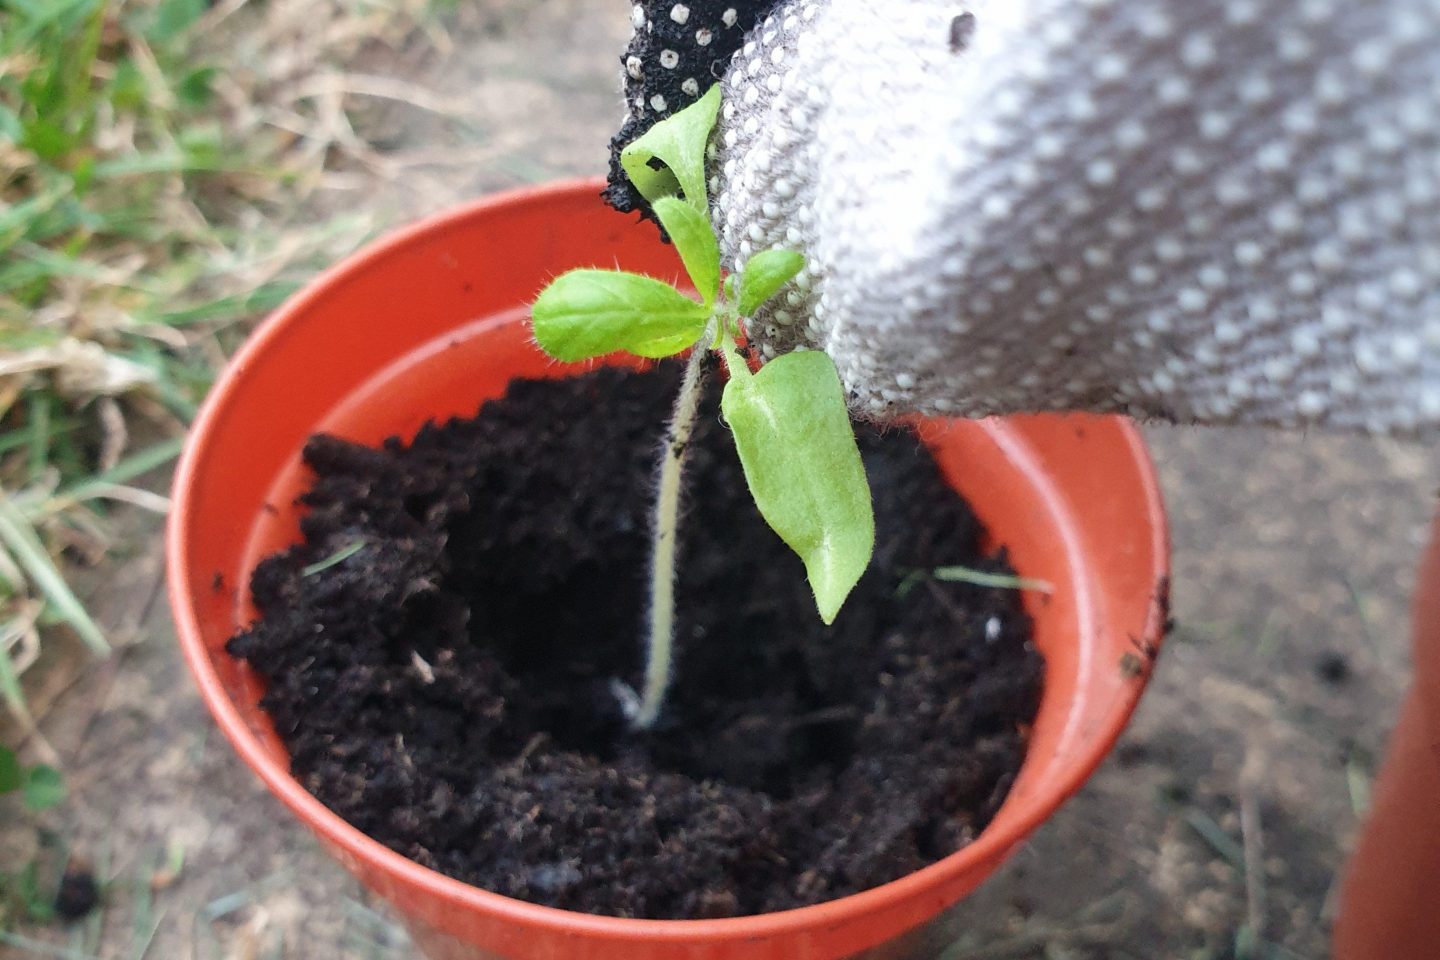 Place seedling in pot 2